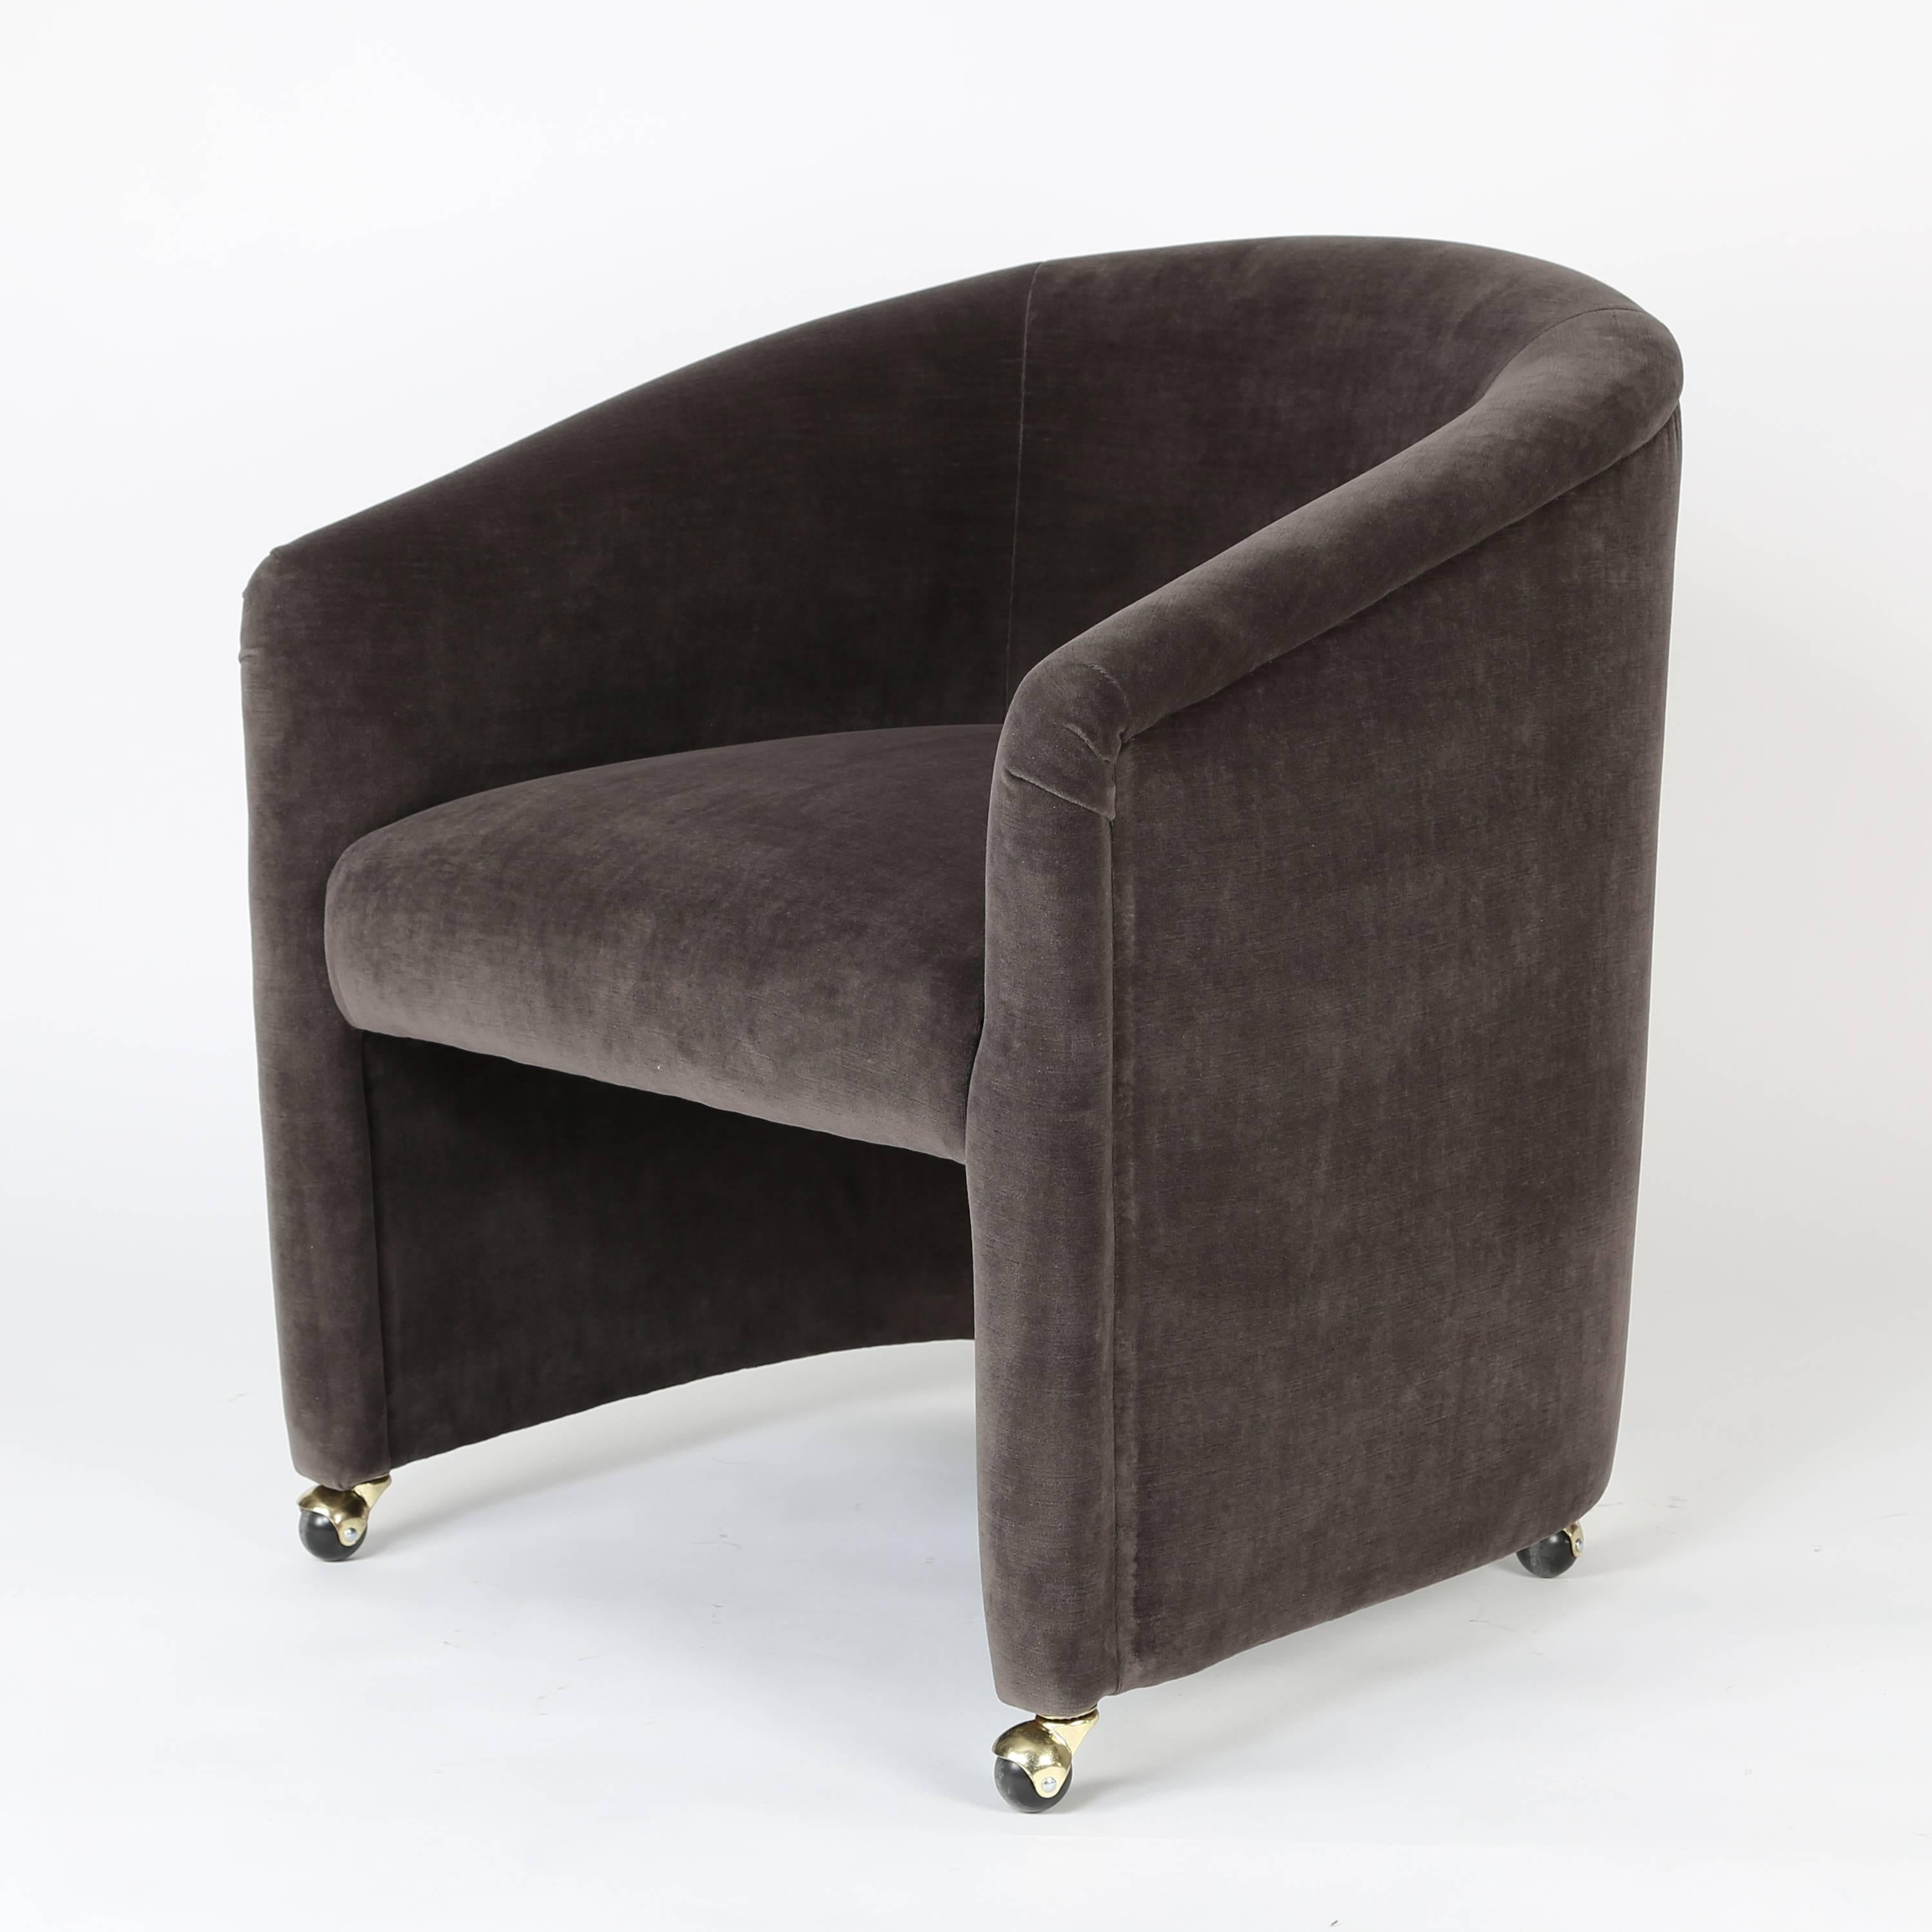 Vintage barrel-back tub chair on brass-finished casters, restored and reupholstered in a warm-grey antiqued cotton velvet. Substantial and comfortable enough to use in a living-room seating group.





